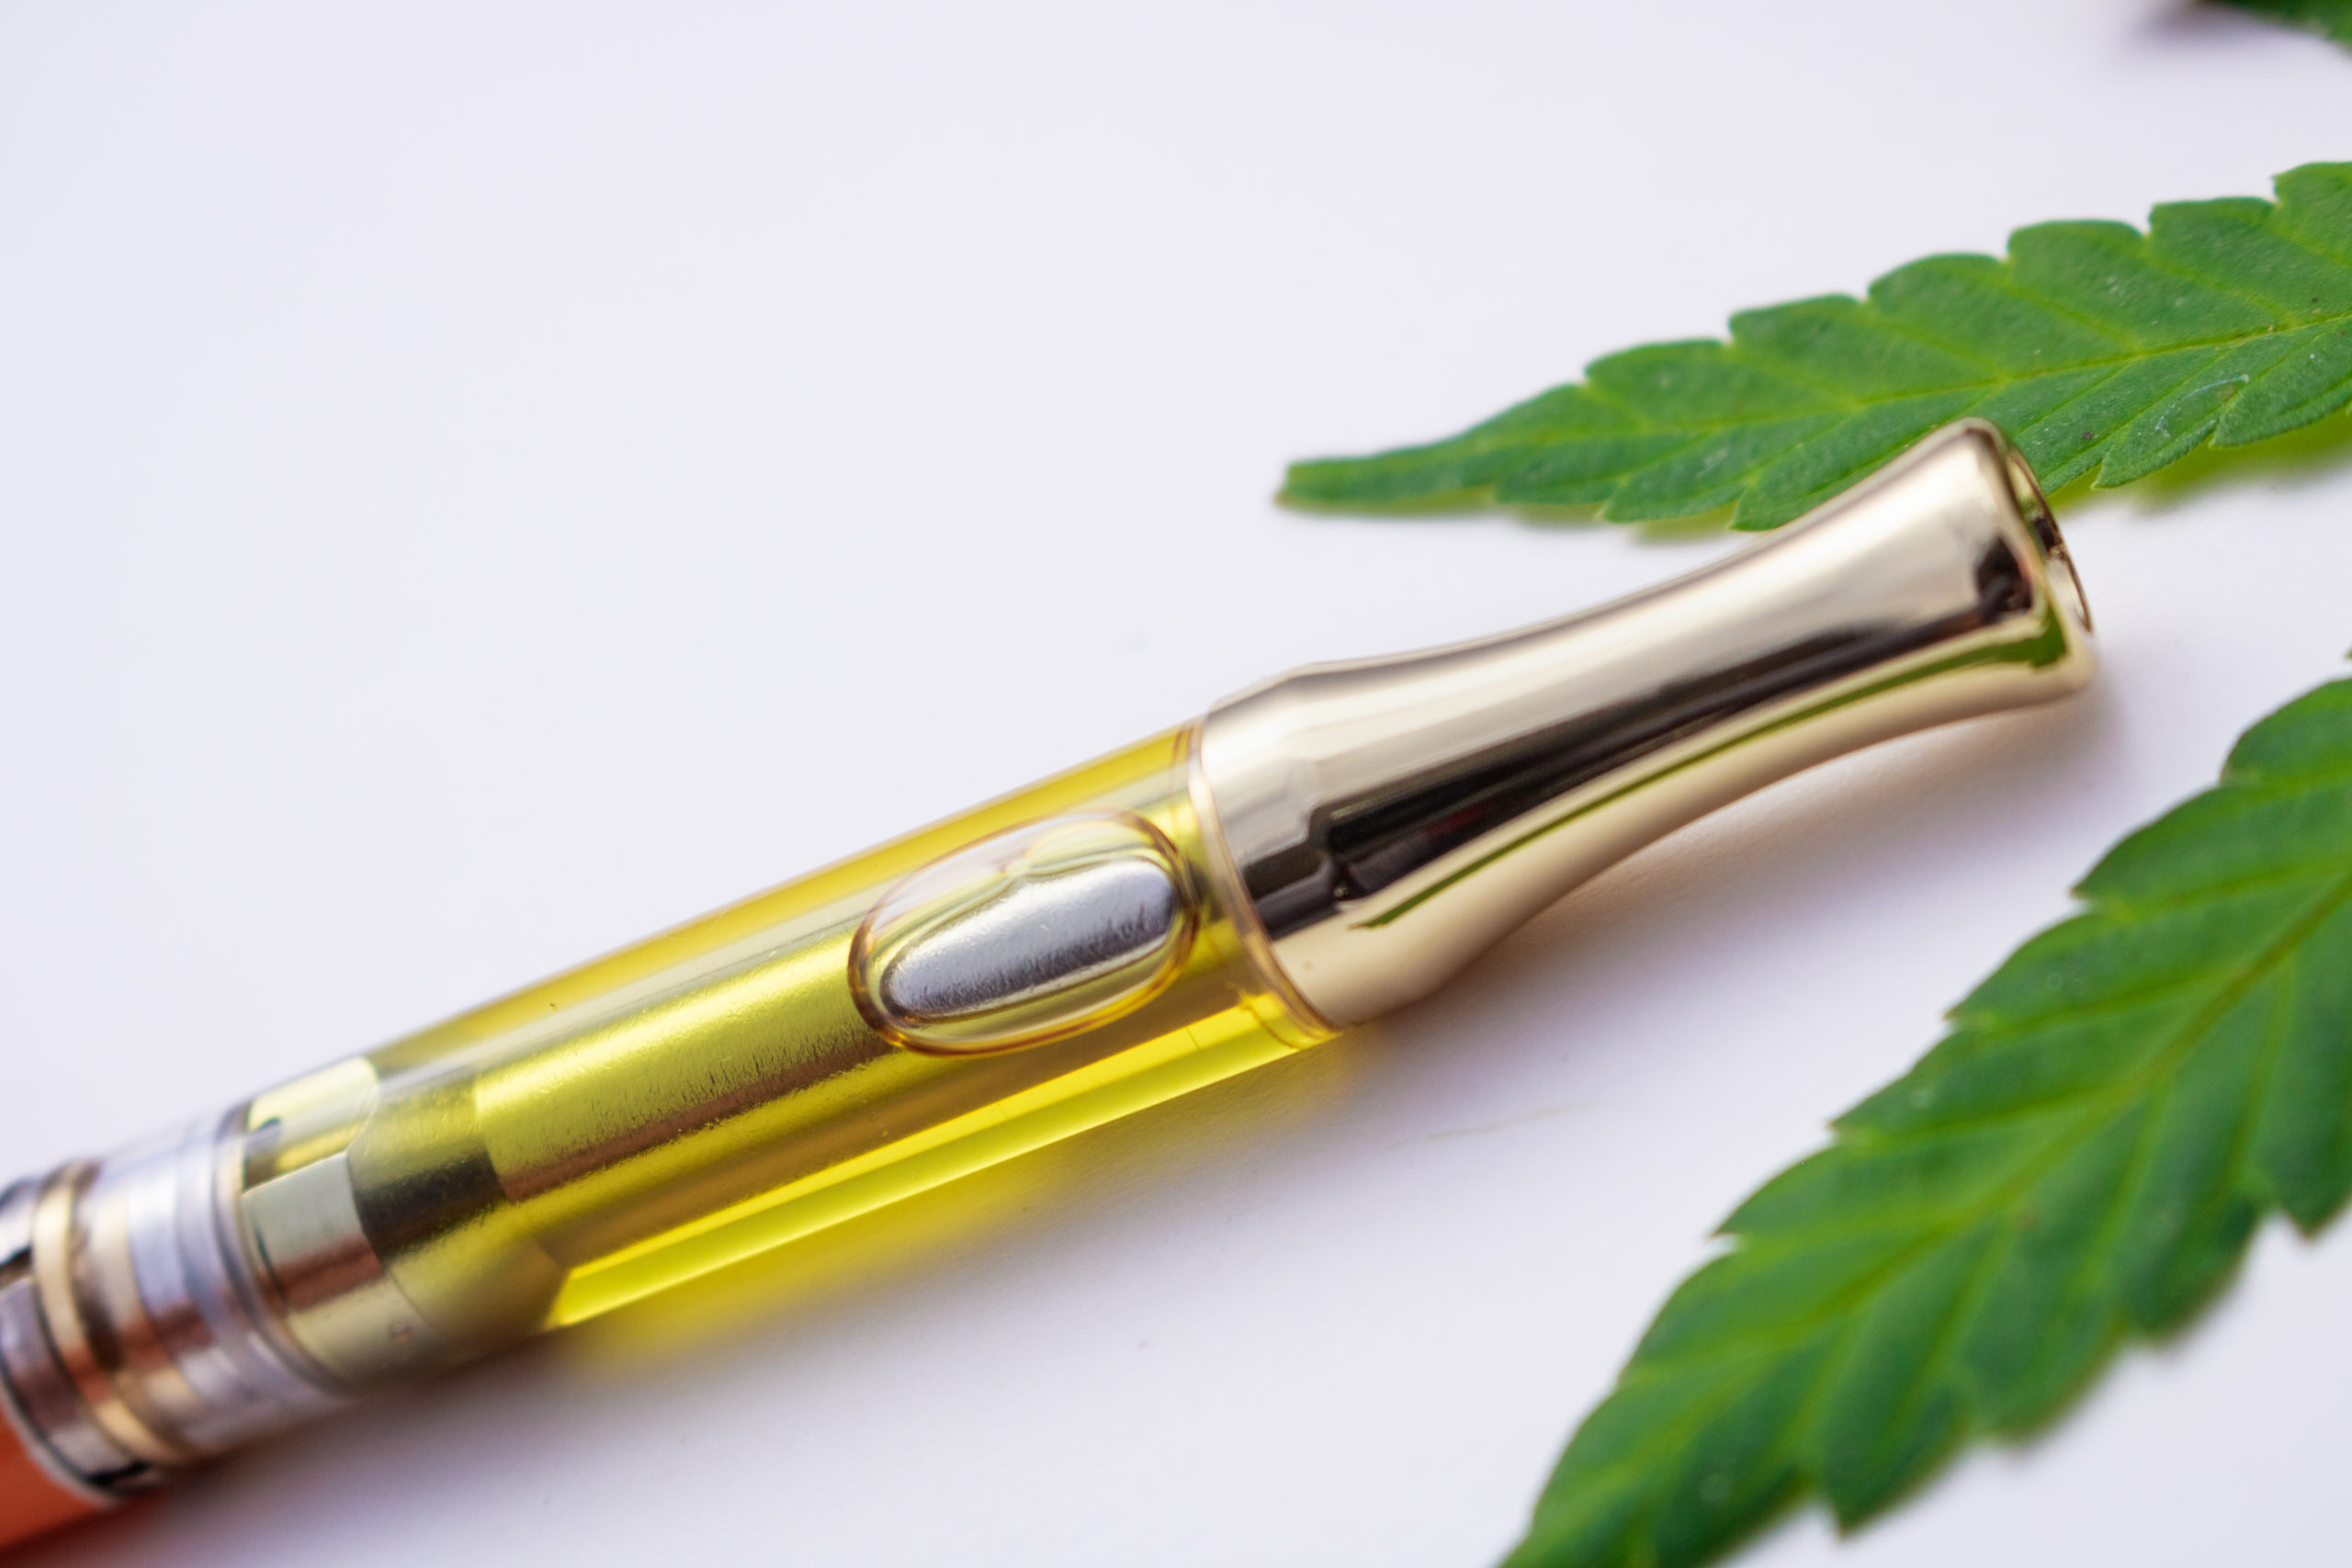 Full gram cartridge vape pen with cannabis oil and terpenes inside. Cannabis leaf on white background. 